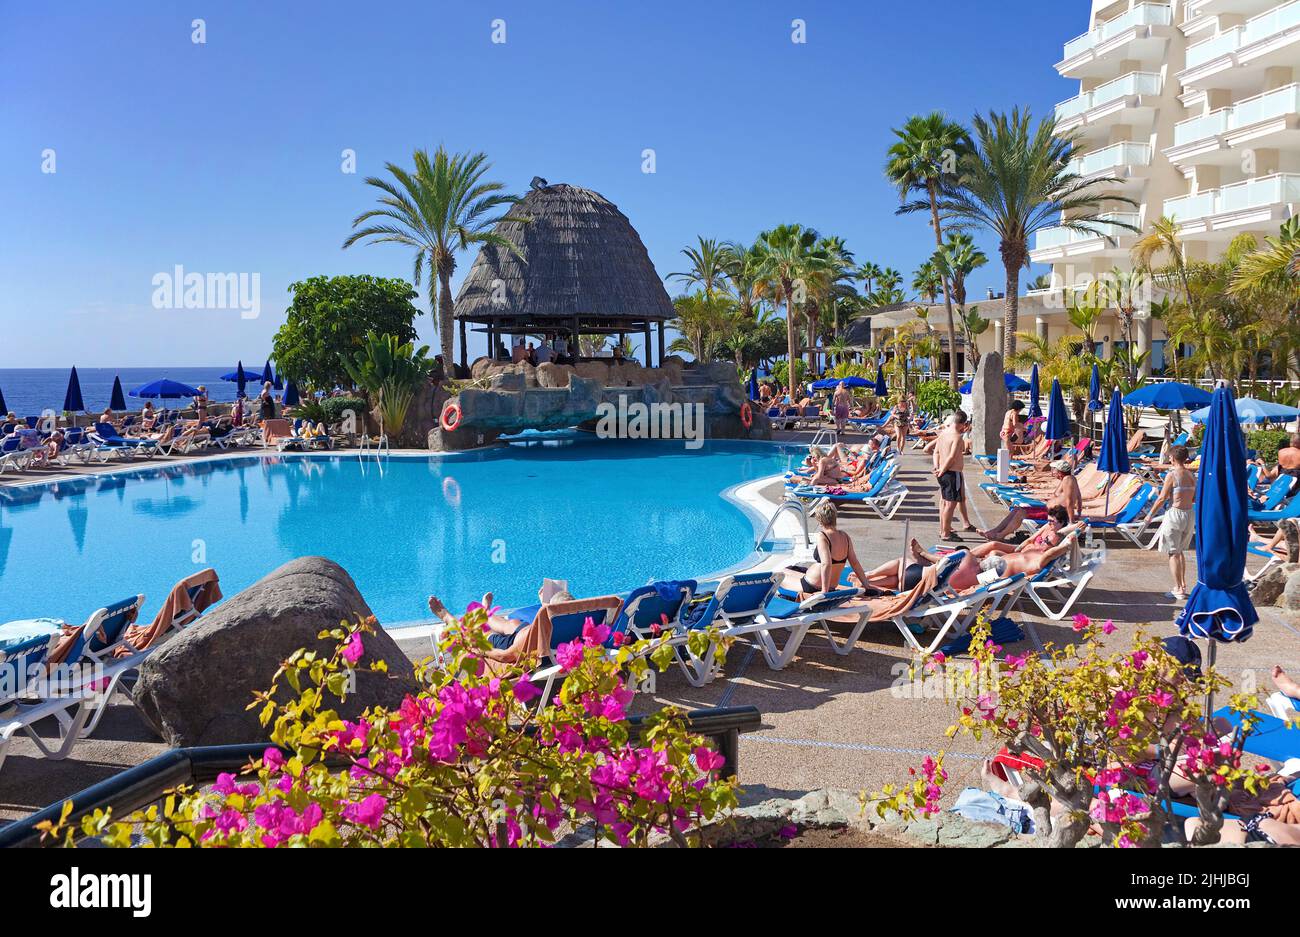 Holidaymakers at the hotel pool, Taurito, Grand Canary, Canary islands, Spain, Europe Stock Photo